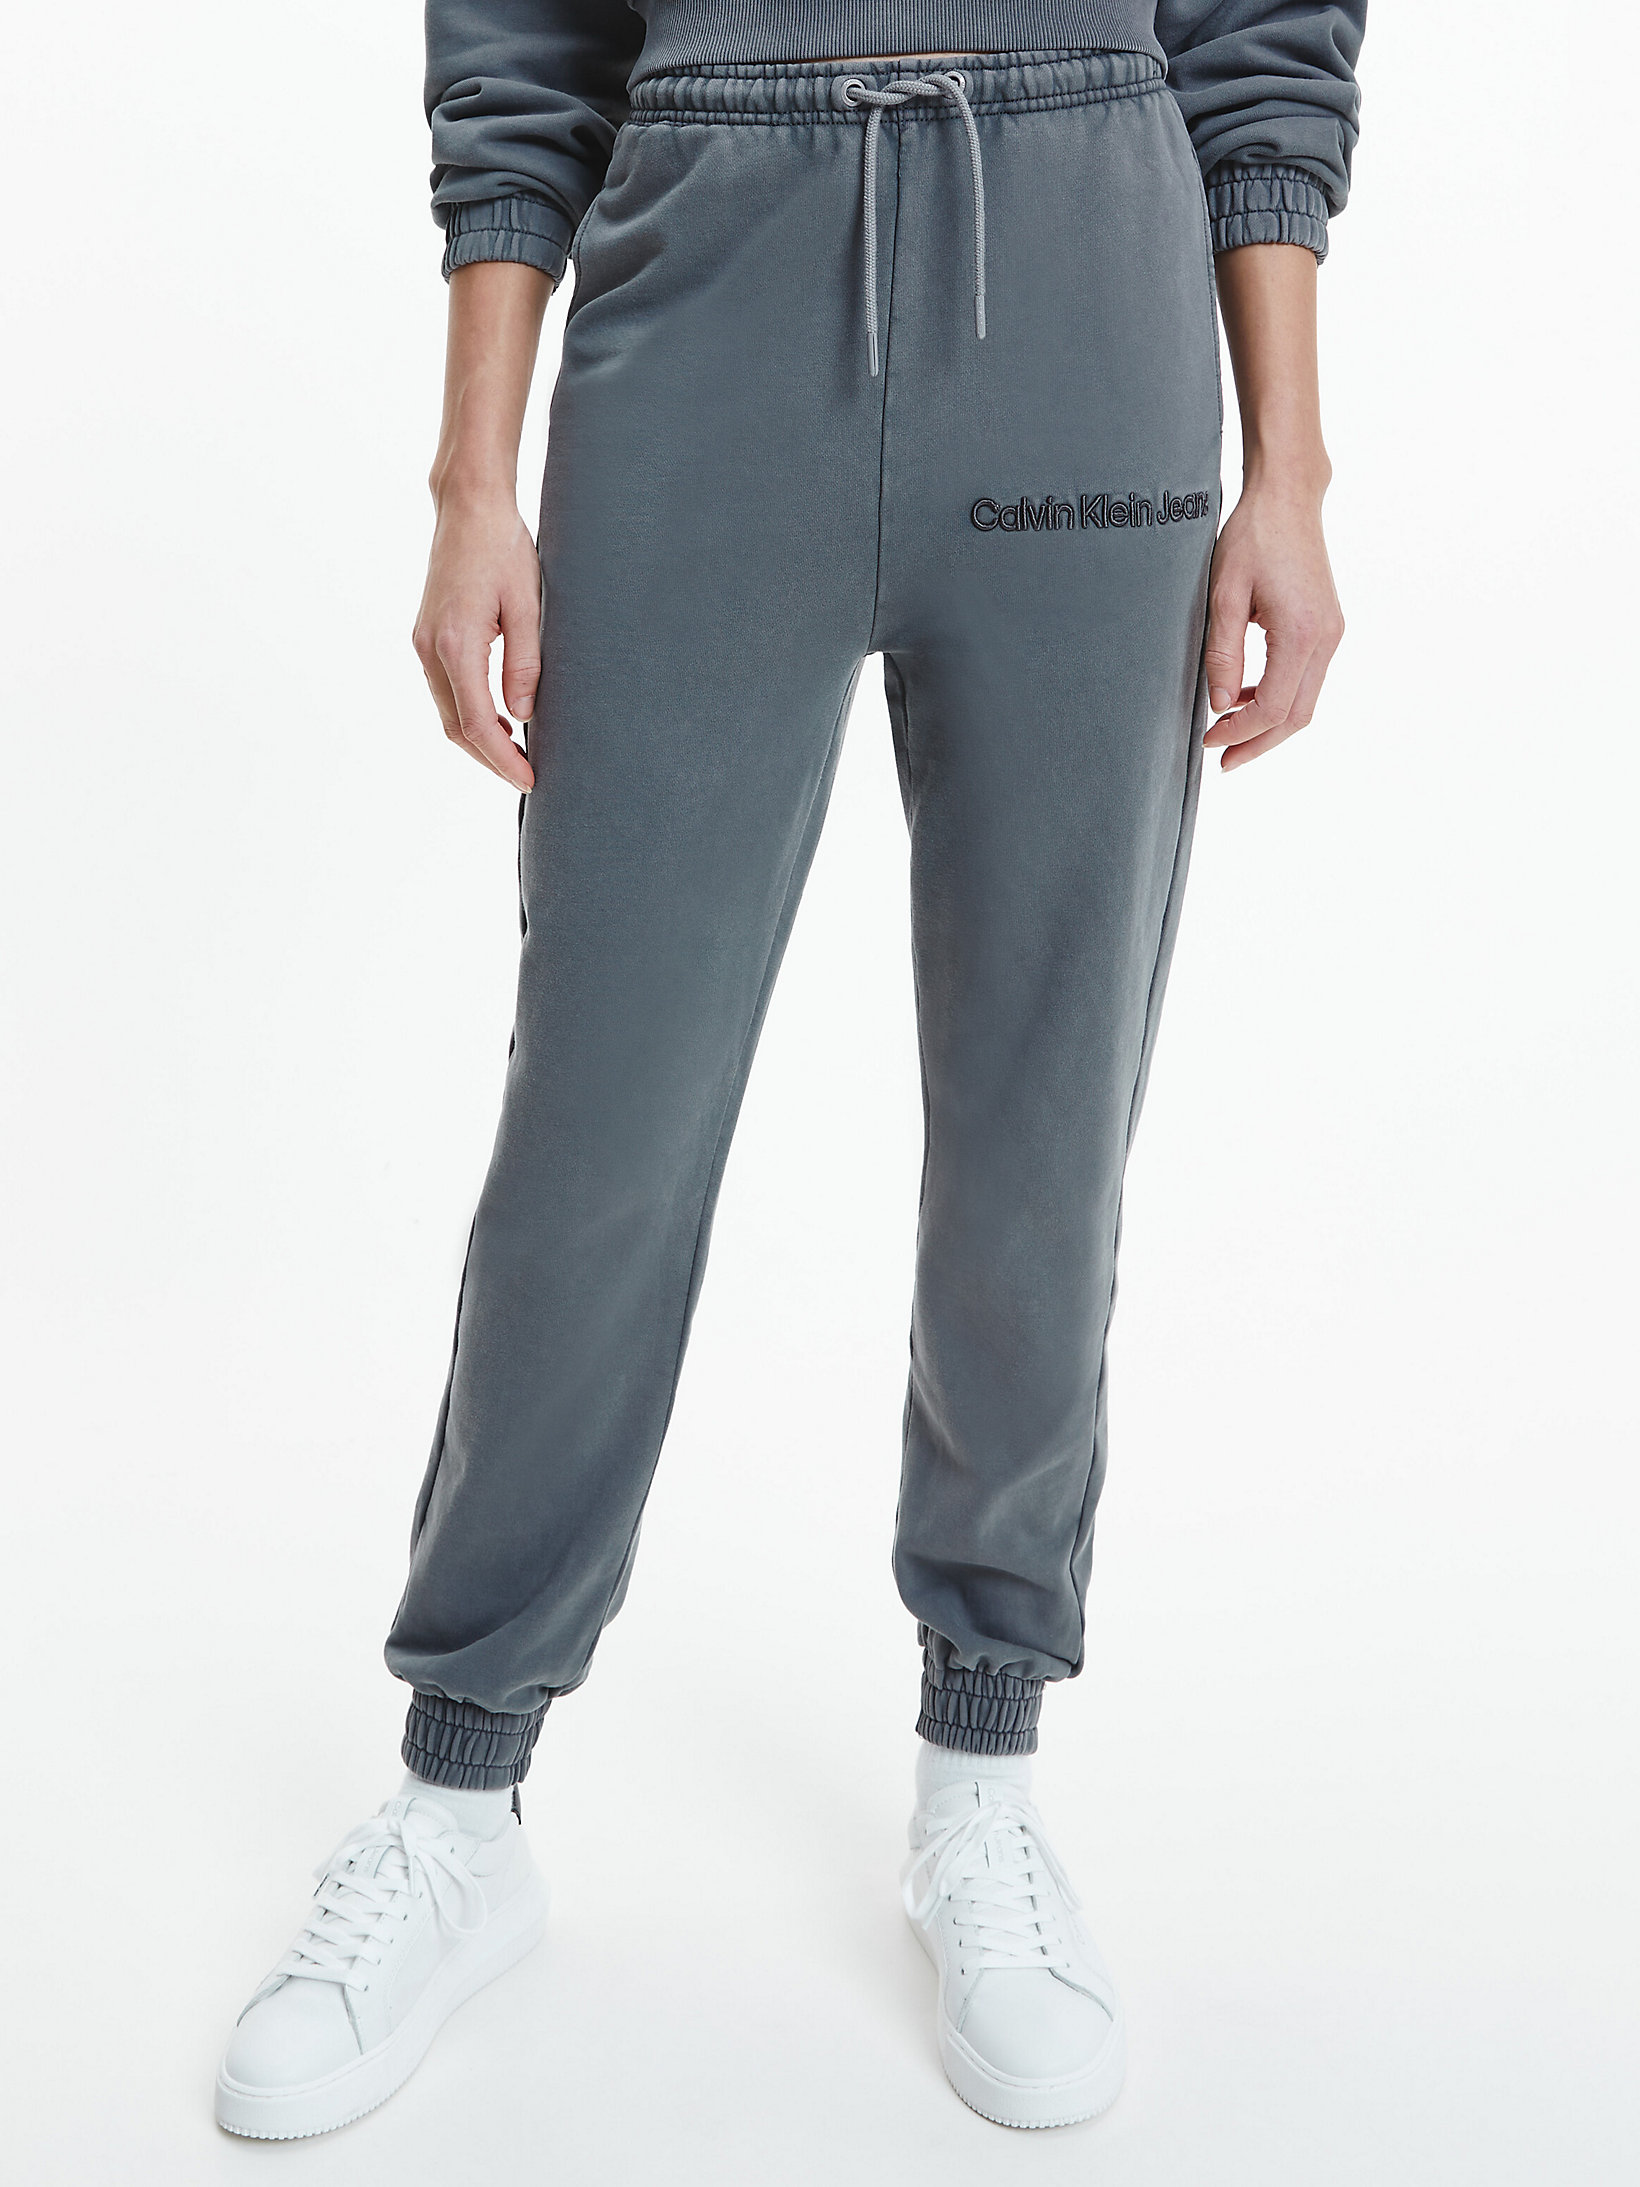 Storm Front Relaxed Washed Cotton Joggers undefined women Calvin Klein